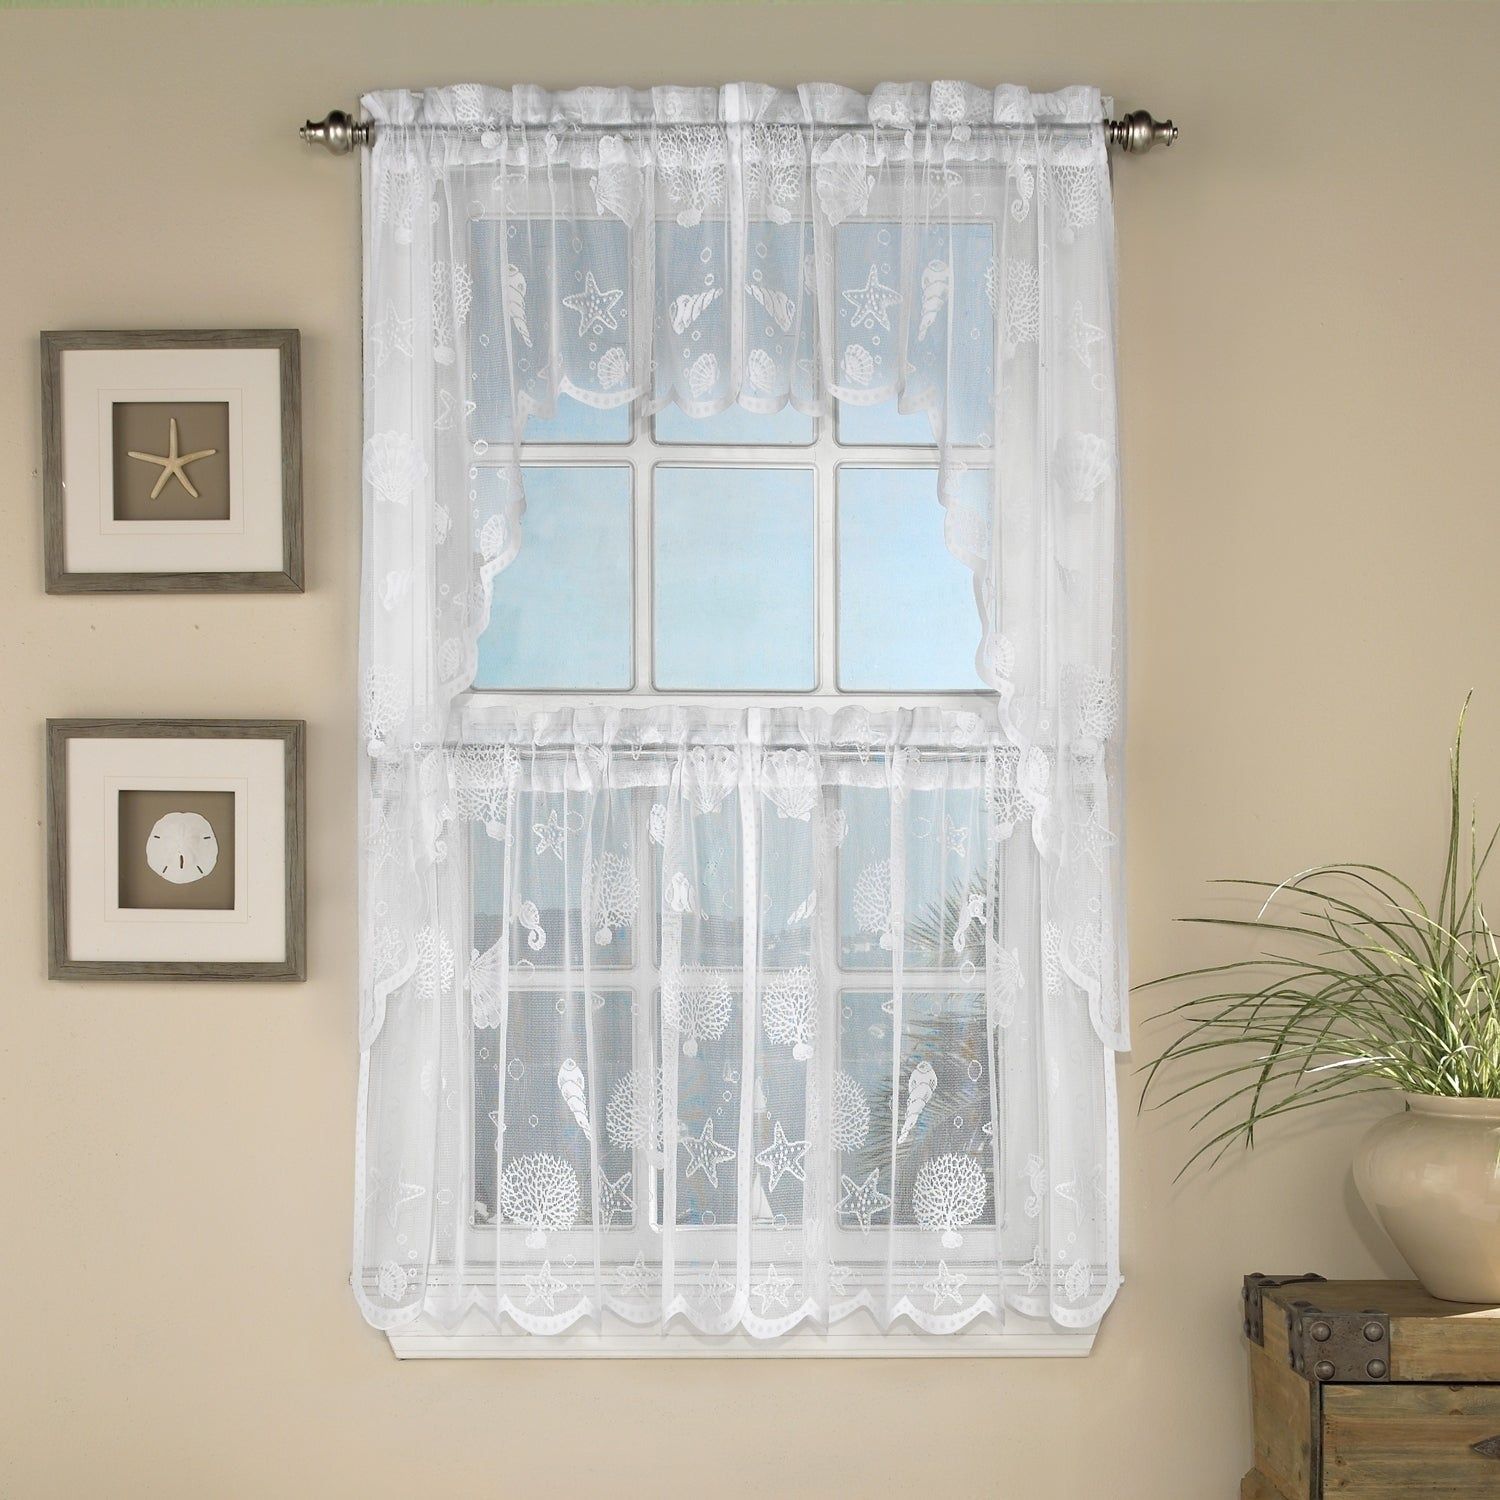 Marine Life Motif Knitted Lace Window Curtain Pieces Throughout White Knit Lace Bird Motif Window Curtain Tiers (View 5 of 20)